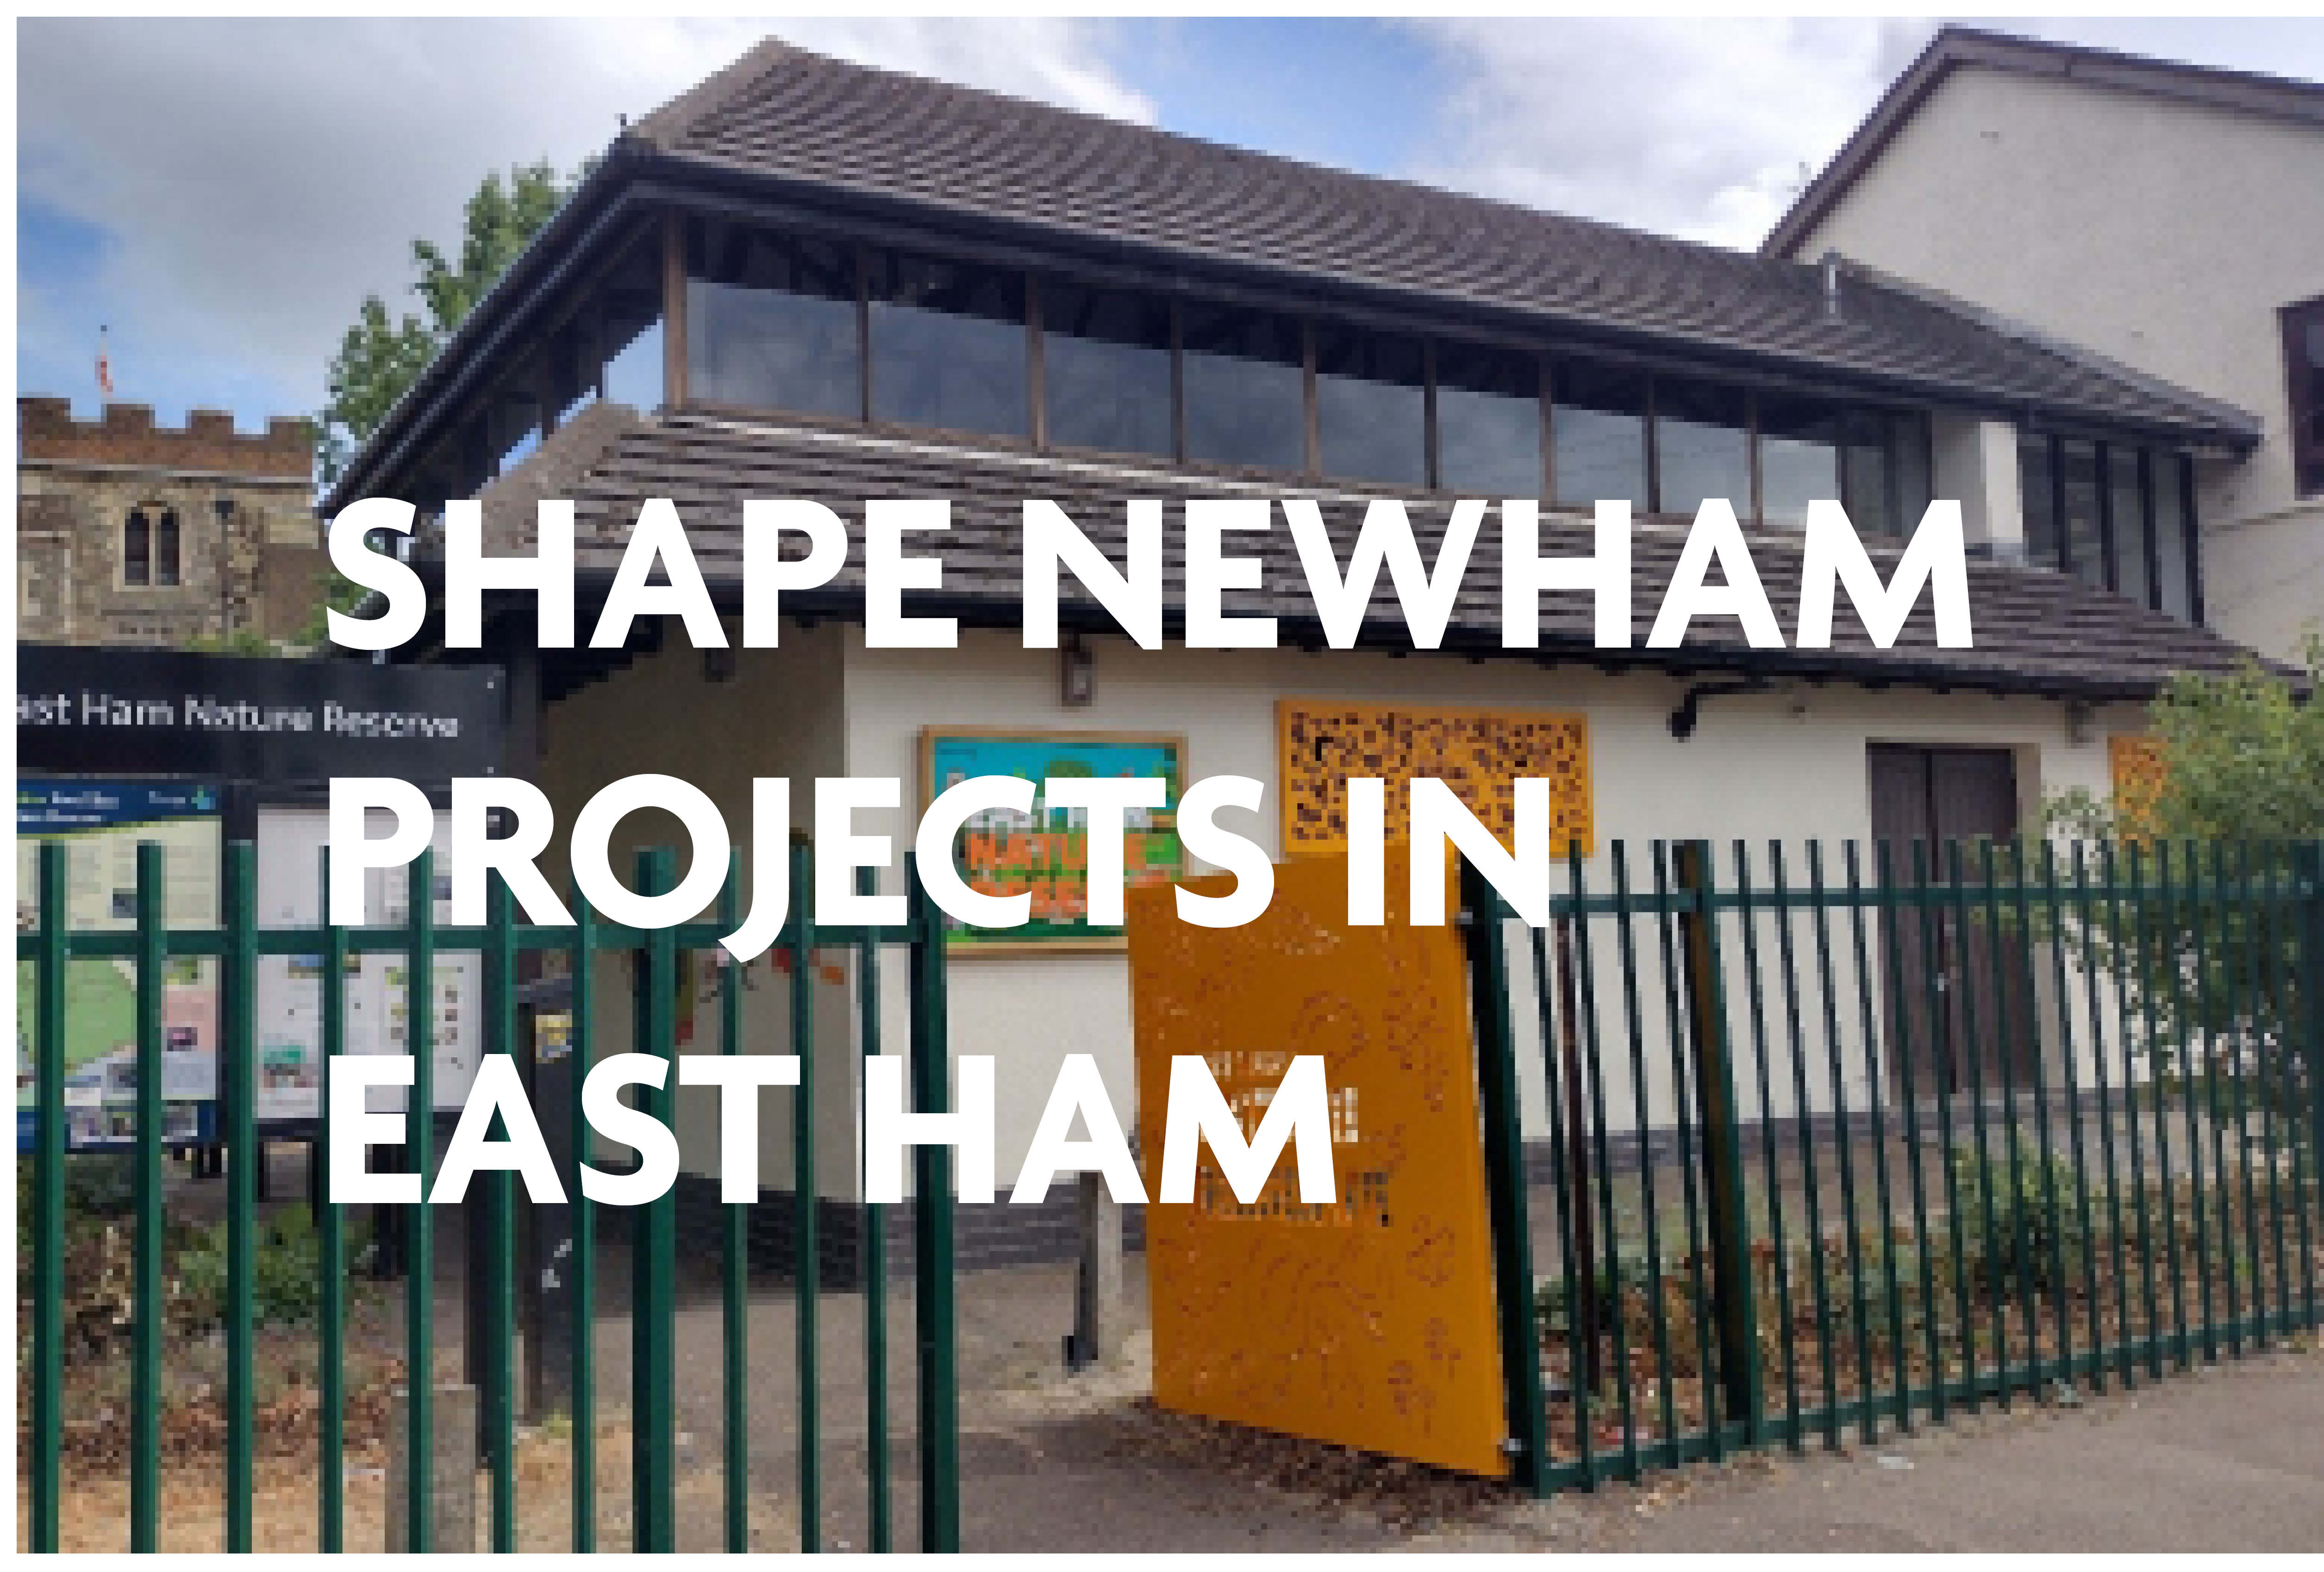 Projects in East Ham